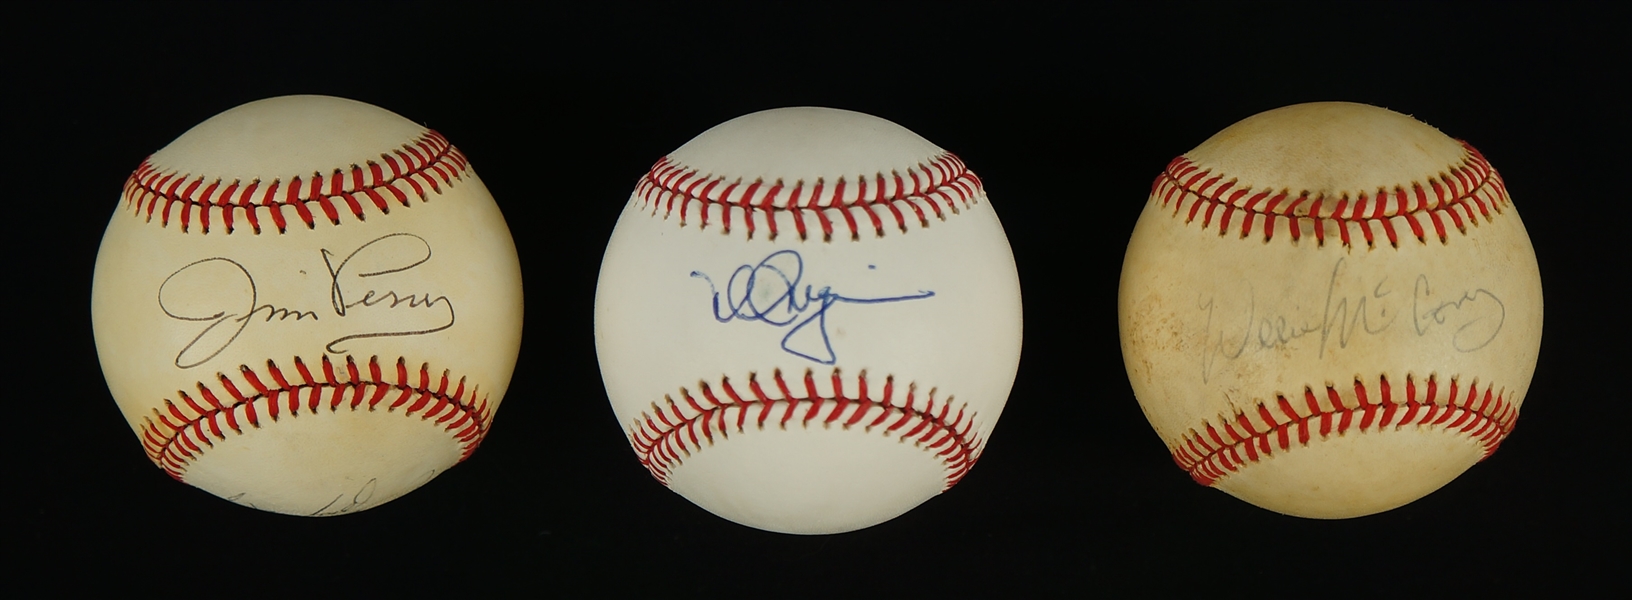 Willie McCovey Mark McGwire & Perry Brothers Autographed Baseballs 